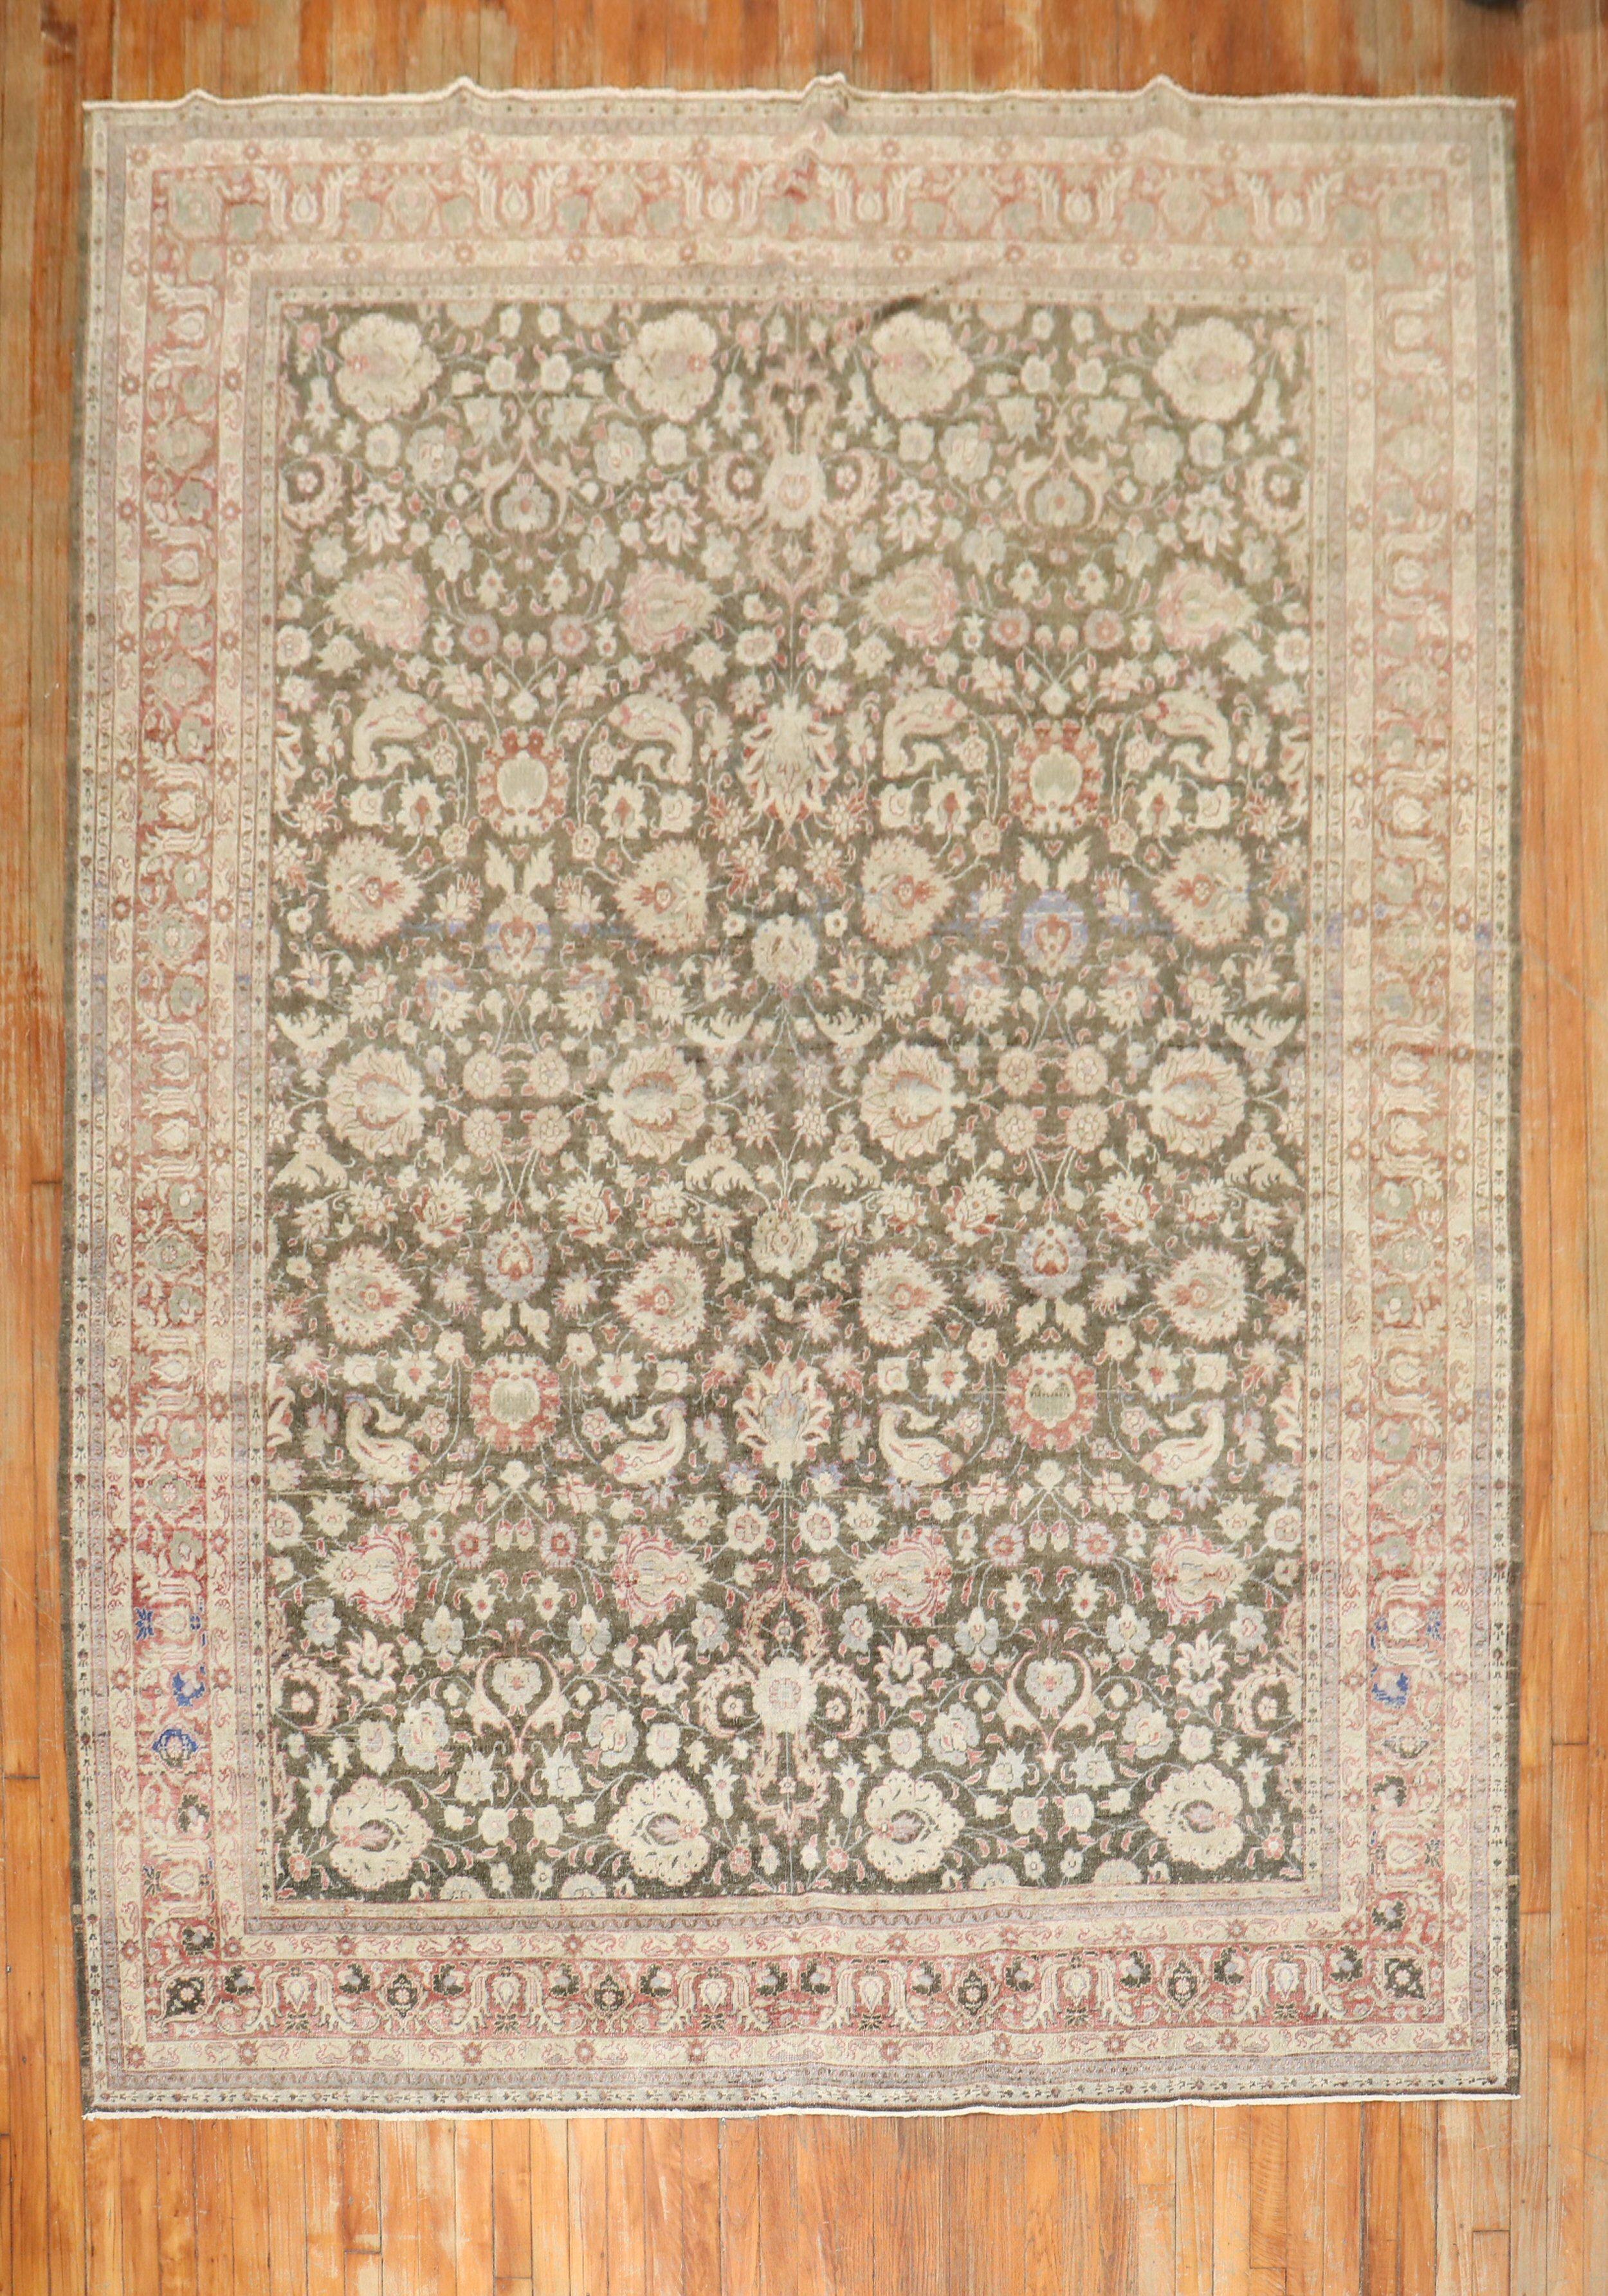 A mid 20th century Turkish Sivas floral pattern rug with a floral field in earth tones

Measures: 7'4'' x 10'5''.